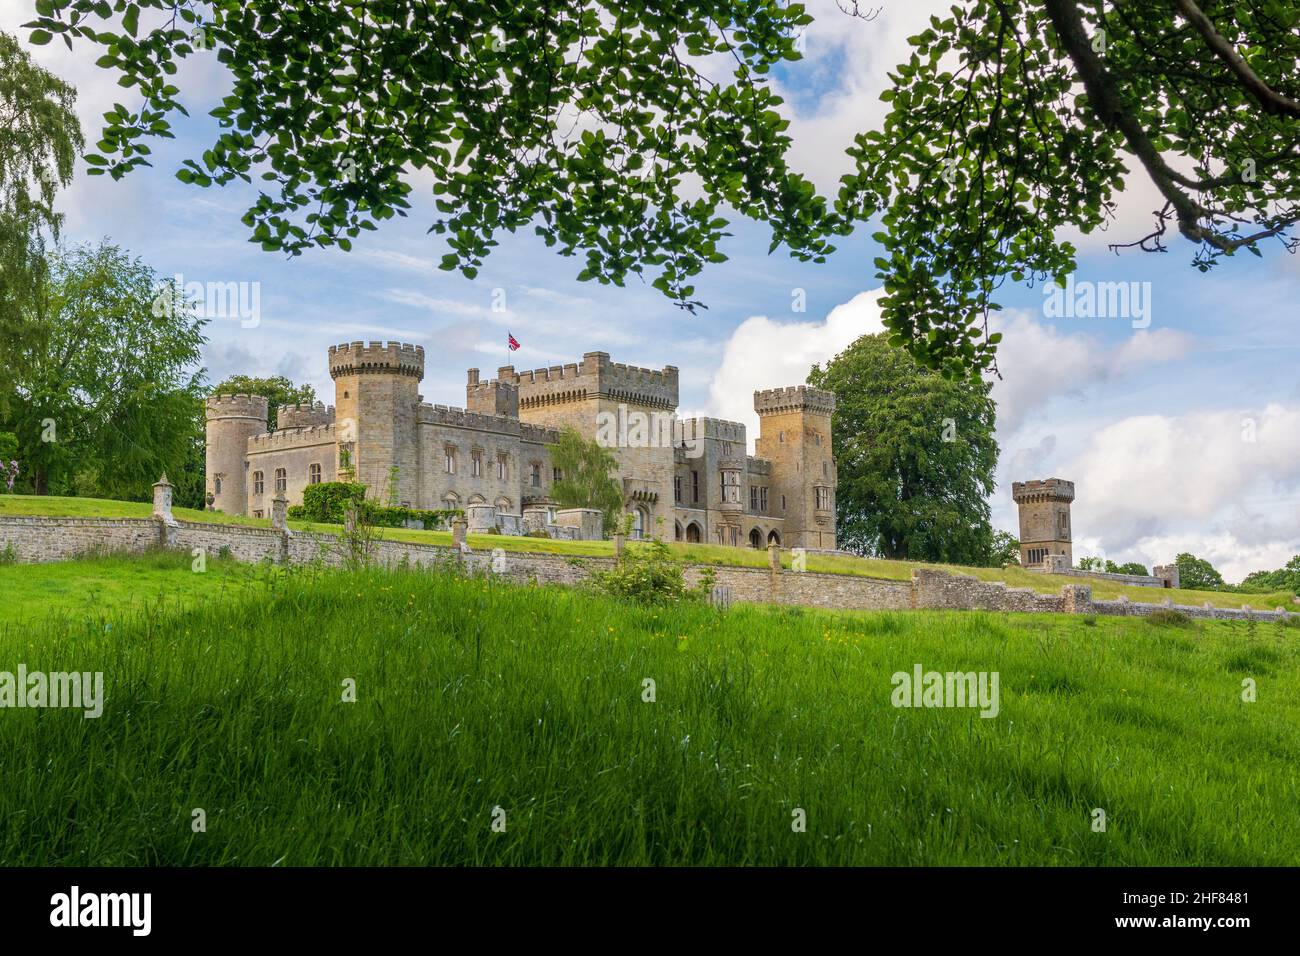 11 June 2021: Richard Payne Knight's Gothic revival Downton Castle with Union Jack flag flying on a sunny summer day Stock Photo